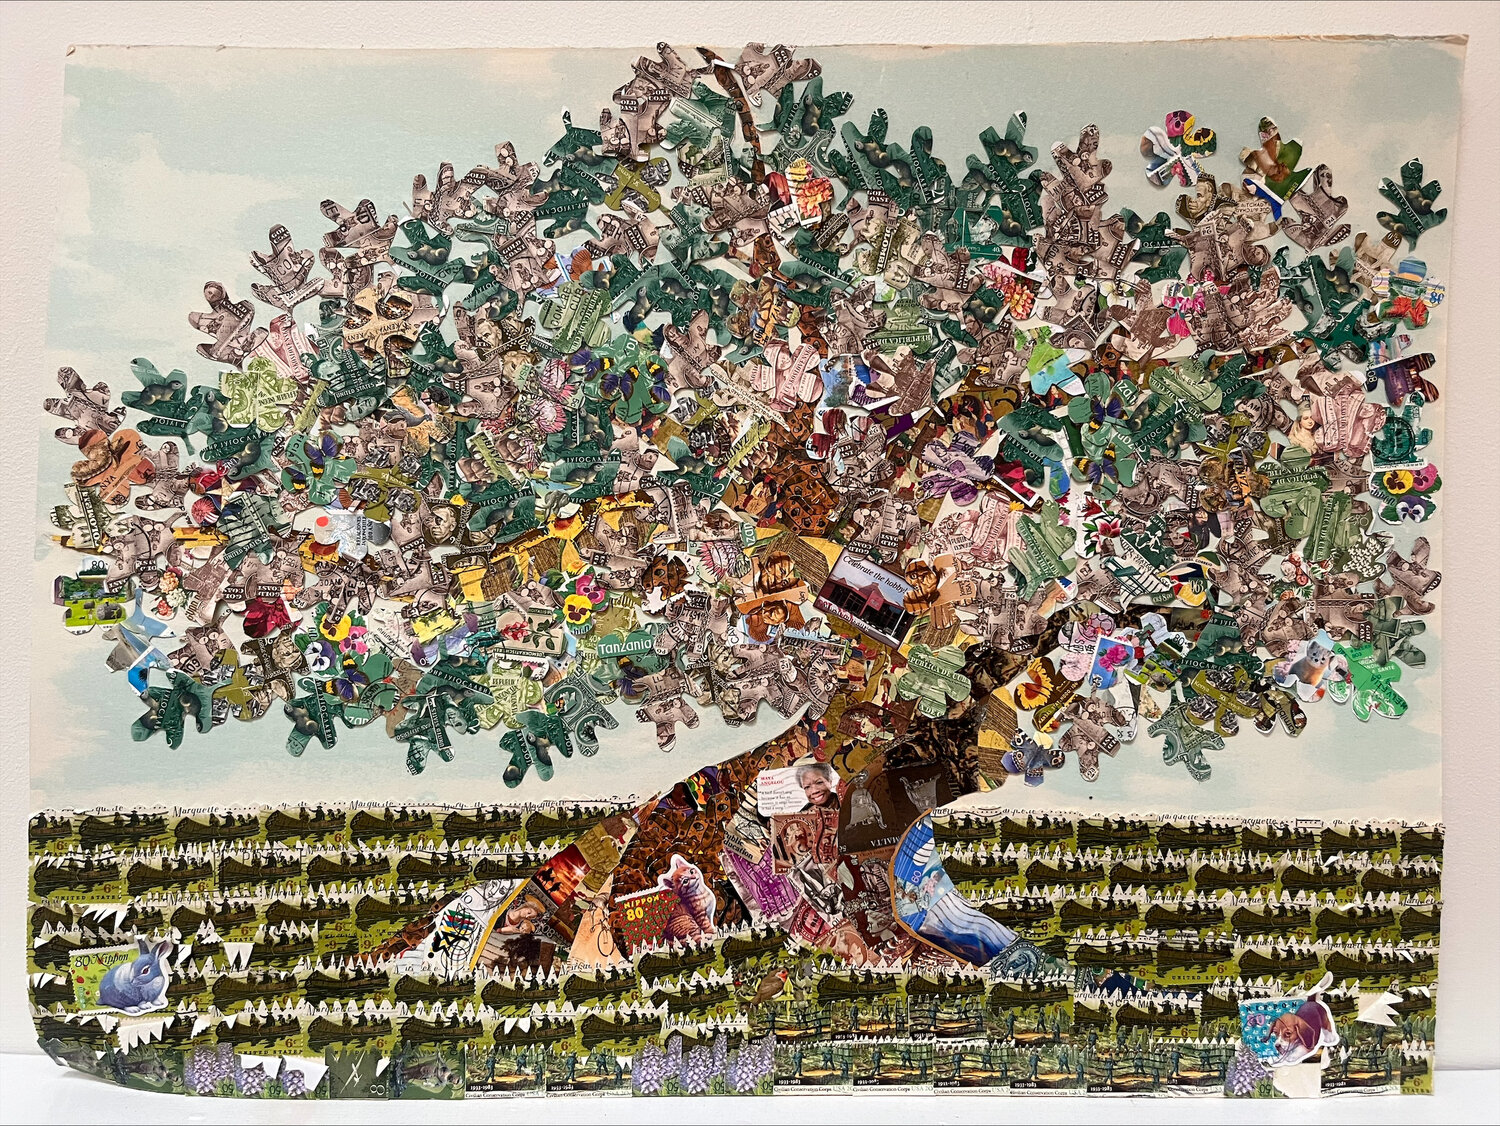 This Tree of Life original stamps collage was designed by Jamie Droste and completed by charter school staff members in celebration of the Holocaust Stamps Project’s completion.